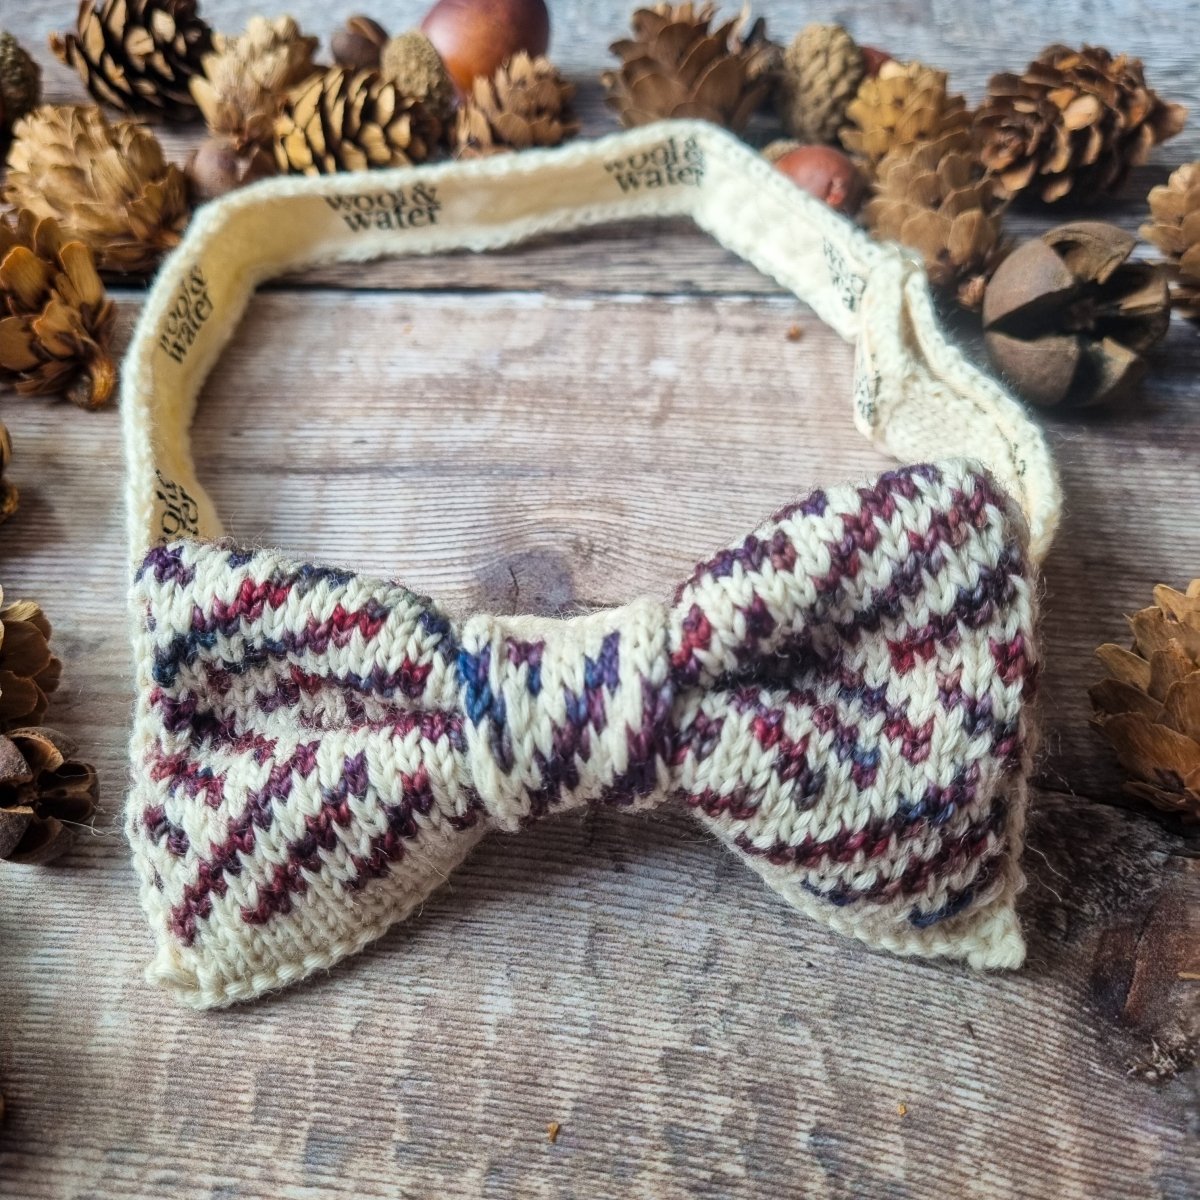 Autumn in Amsterdam Bow Tie - Wool & Water